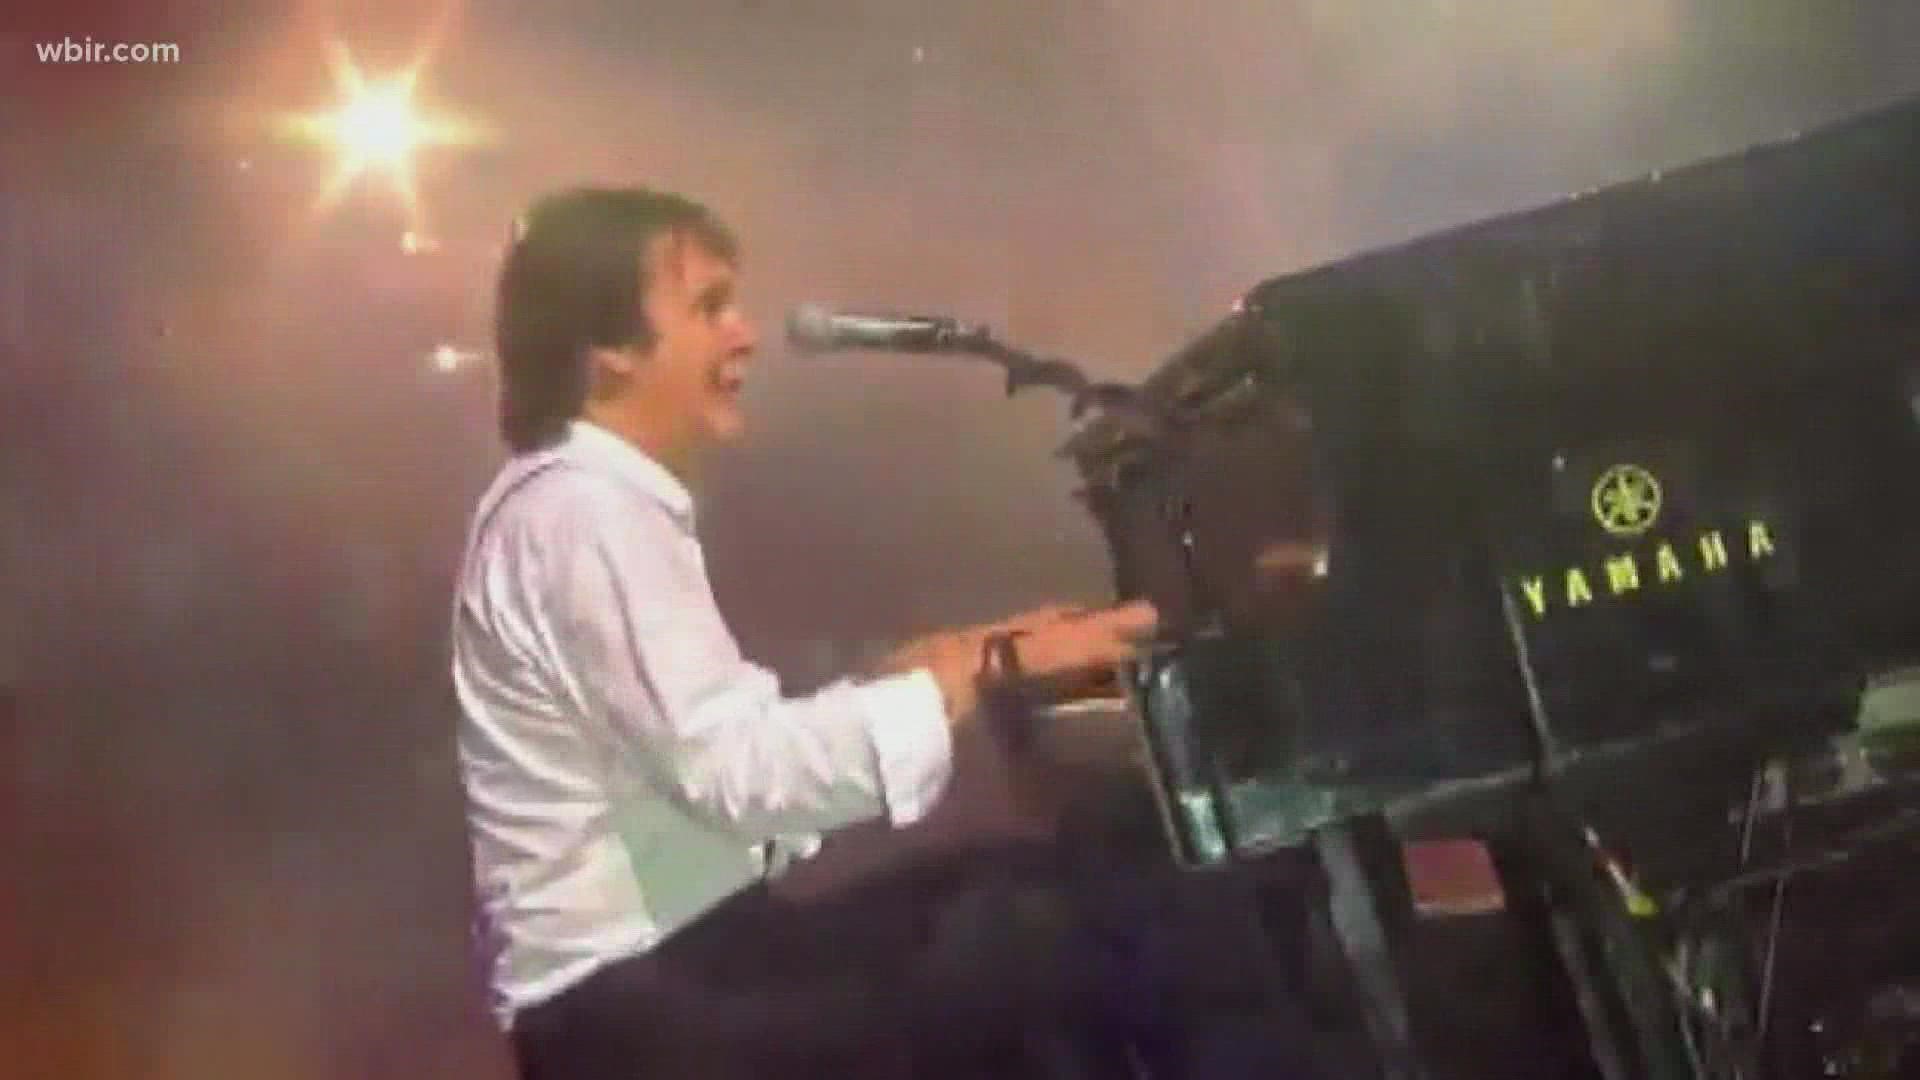 Tuesday's performance was the first time Paul McCartney had ever played in Knoxville.